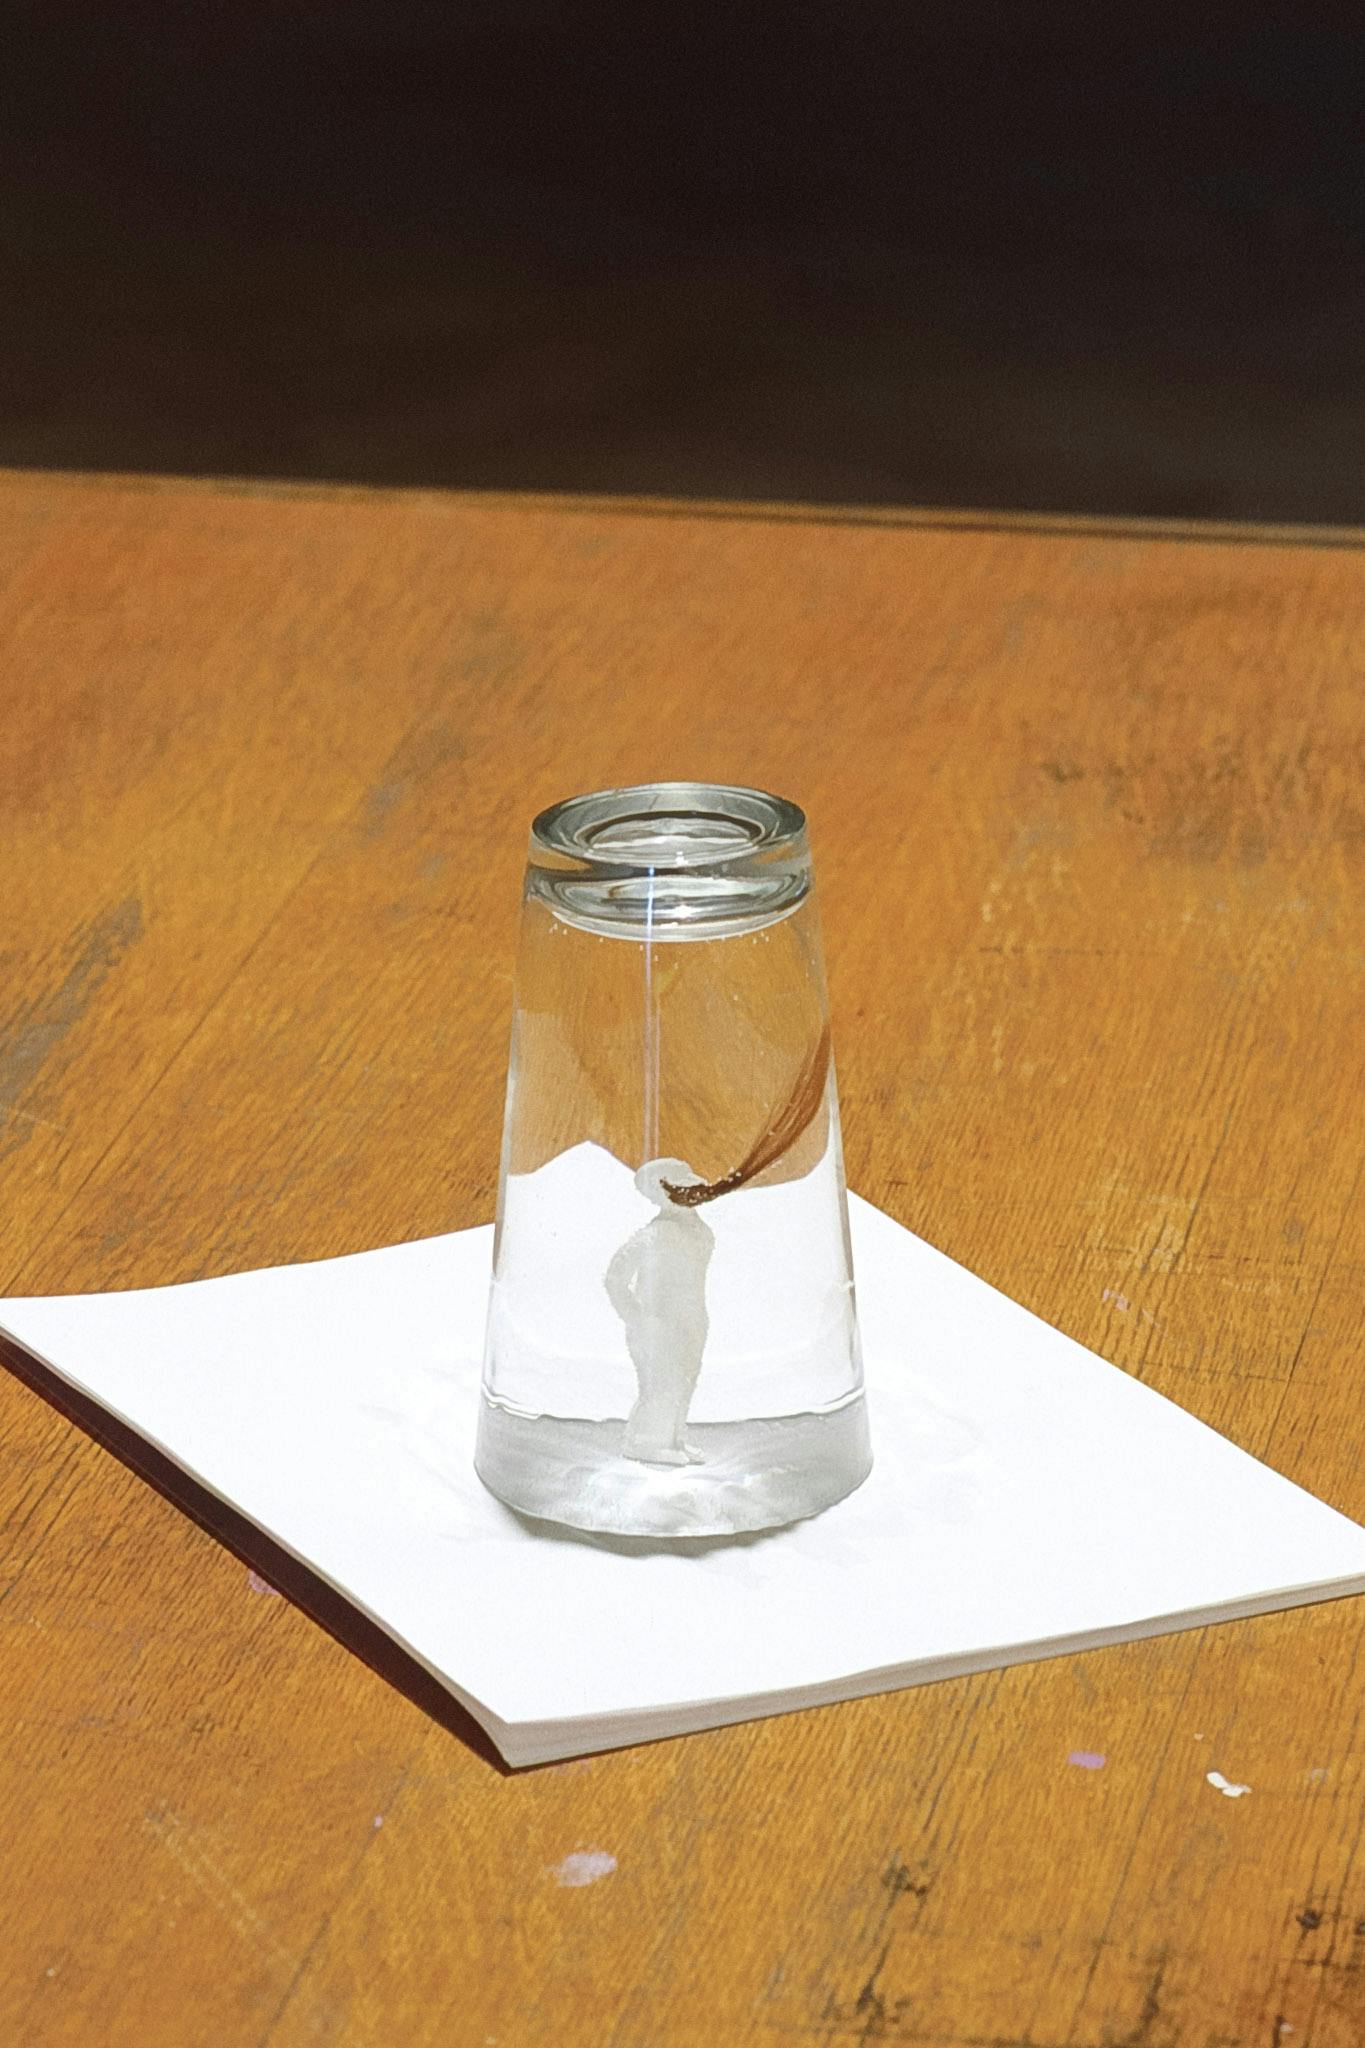 This is a close-up view of an artwork placed on the wooden desk. On a small pile of white paper napkins, a water-filled glass is placed upside down. A small white human figure stands inside the glass.